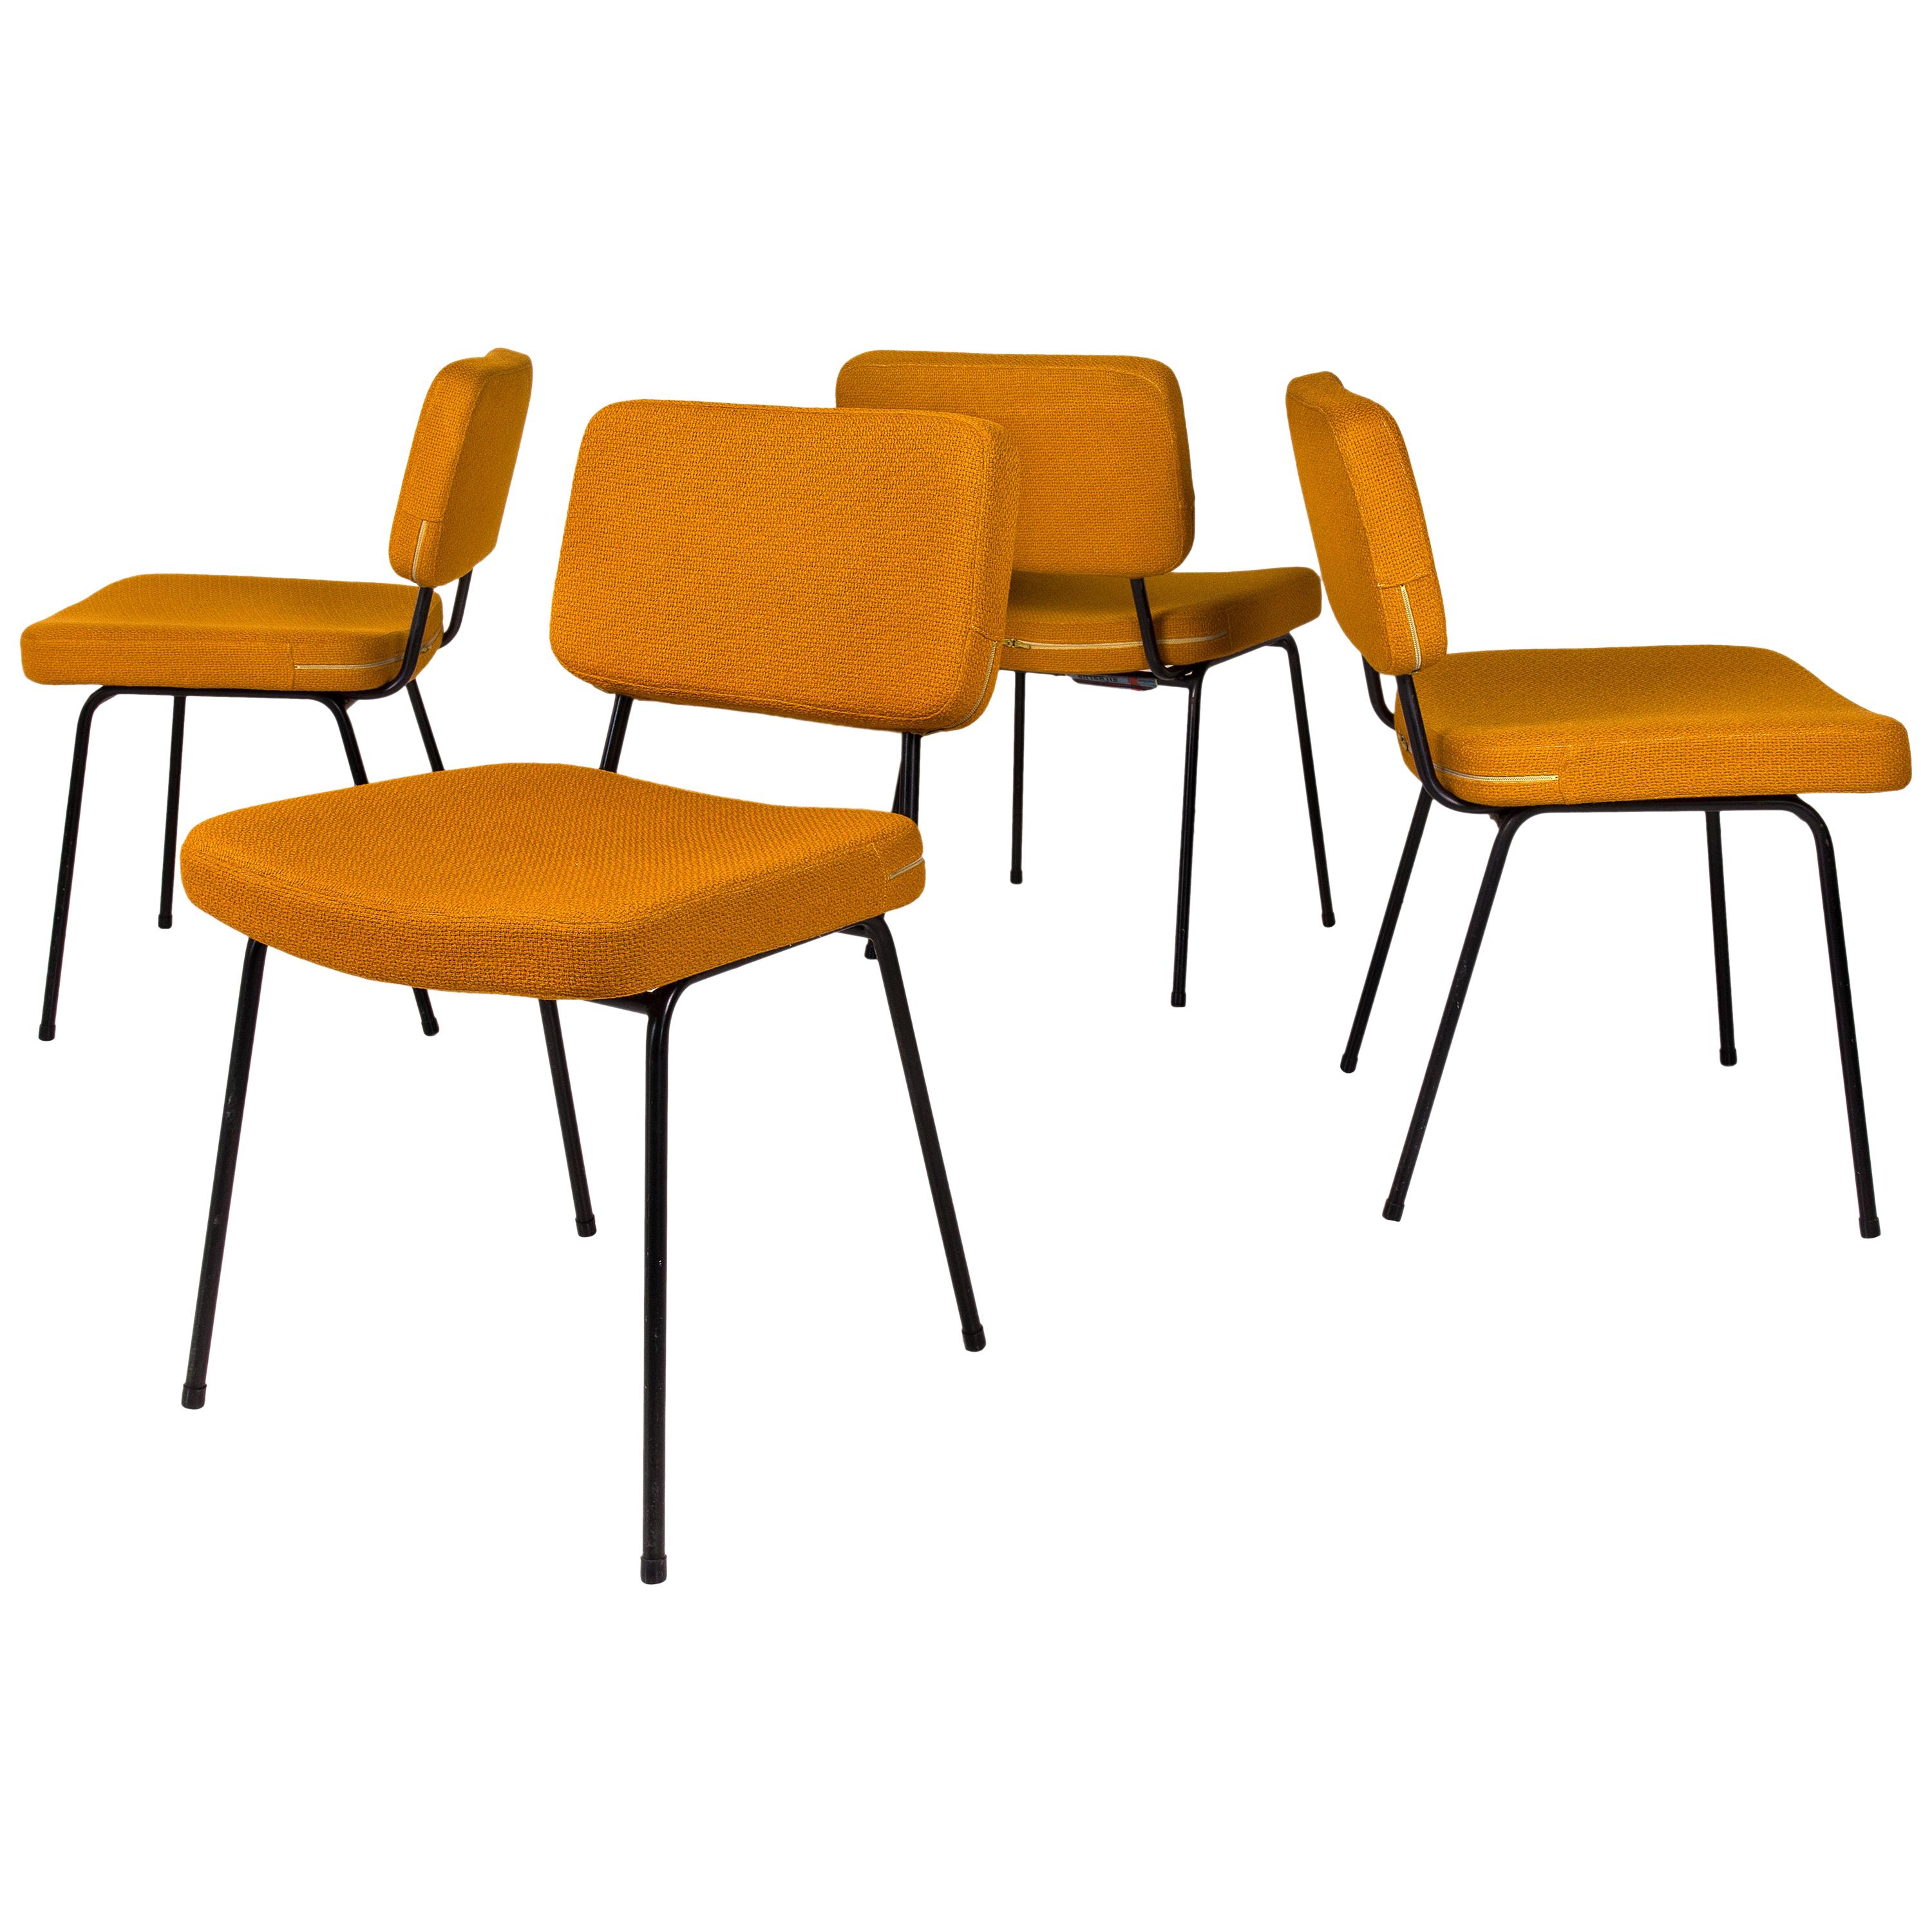 Set of 4 Chairs by André Simard for Airborne, circa 1955, France